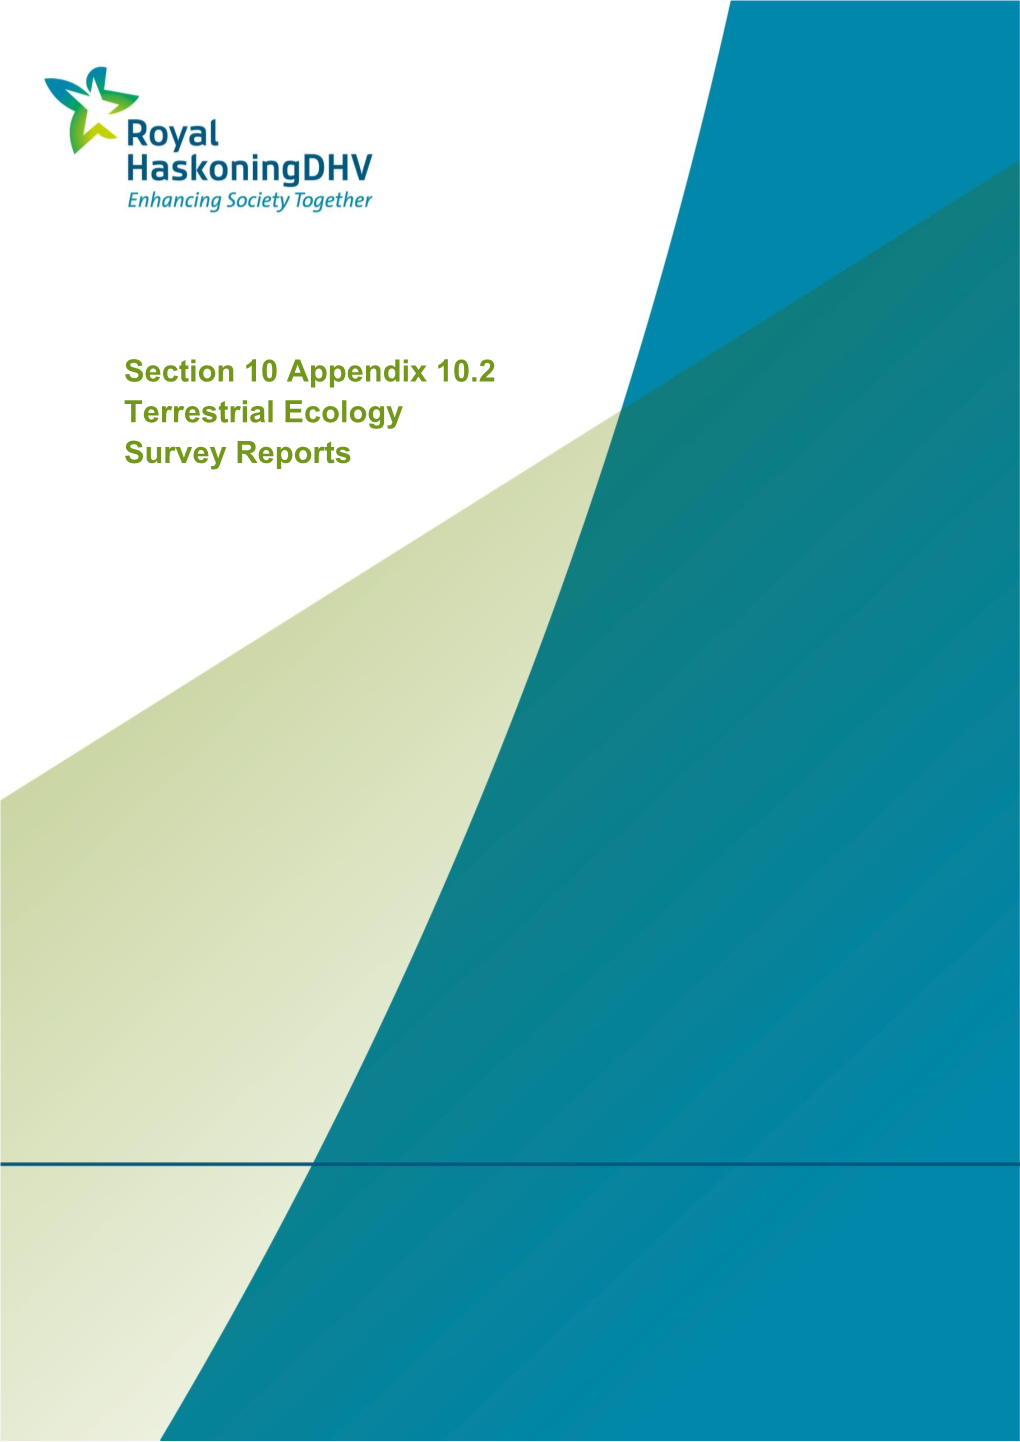 Section 10 Appendix 10.2 Terrestrial Ecology Survey Reports [Blank Page] Extended Phase 1 Survey of an Area Across Wilton International and Teesport